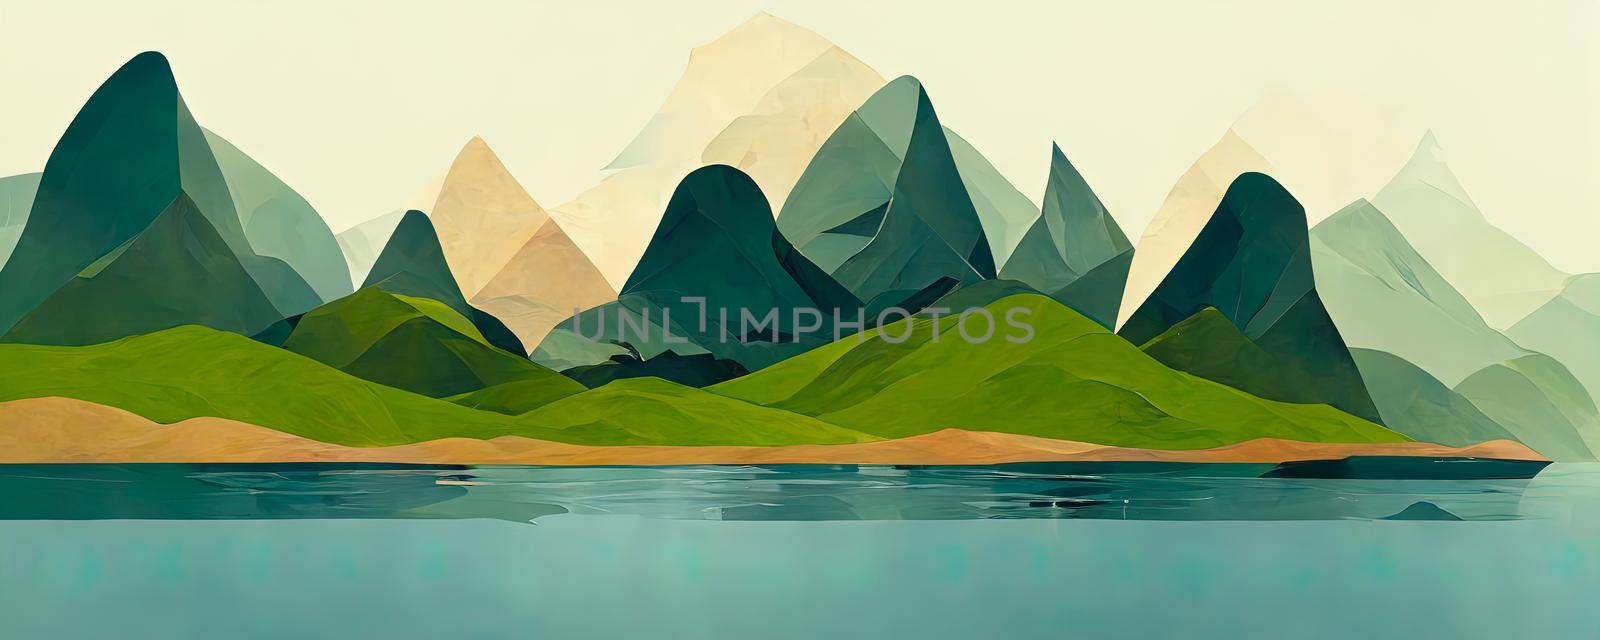 landscape of mountains on the background of the lake, Colorful abstract wallpaper texture background illustration by TRMK